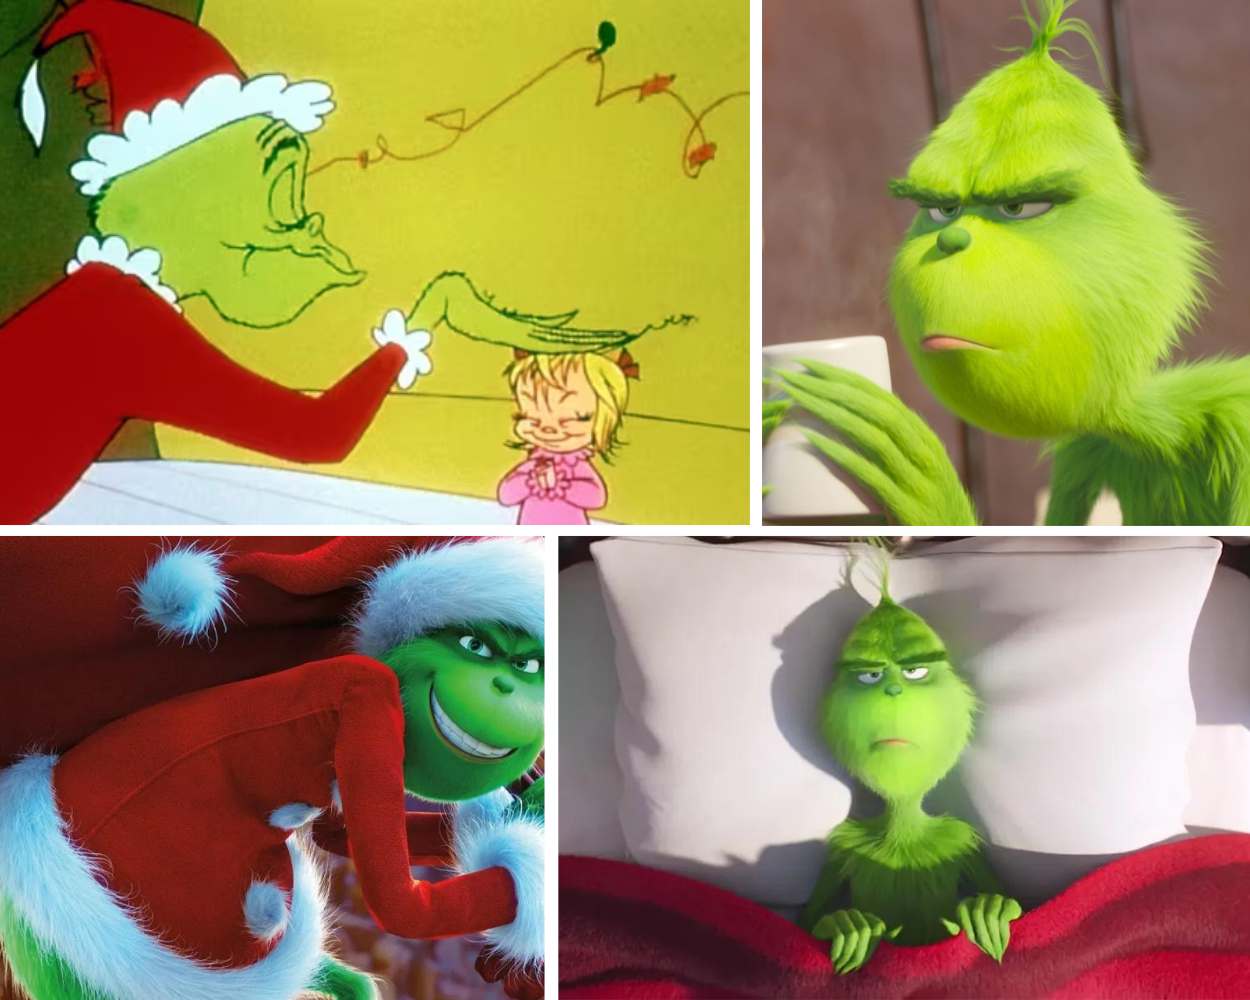 The Grinch - Green Cartoon Characters